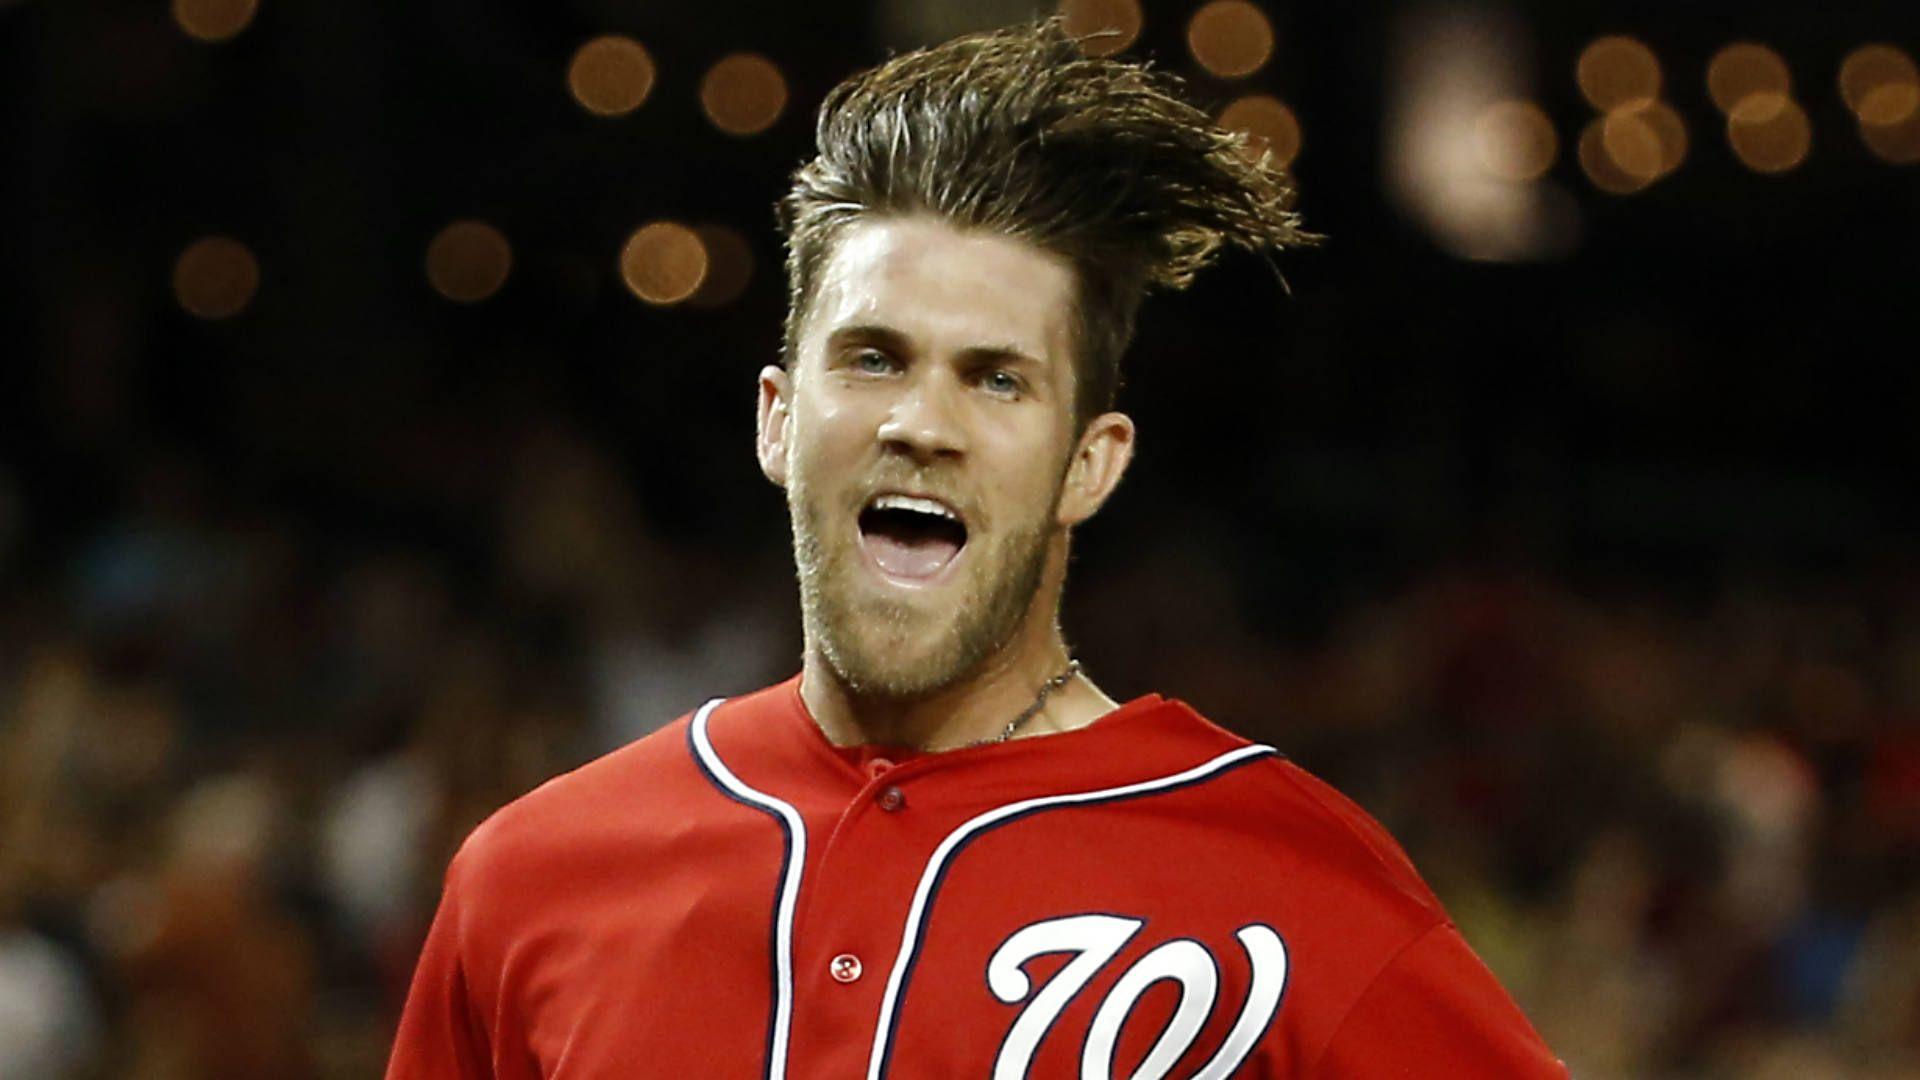 Bryce Harper says it takes 30 minutes to get his hair ready before